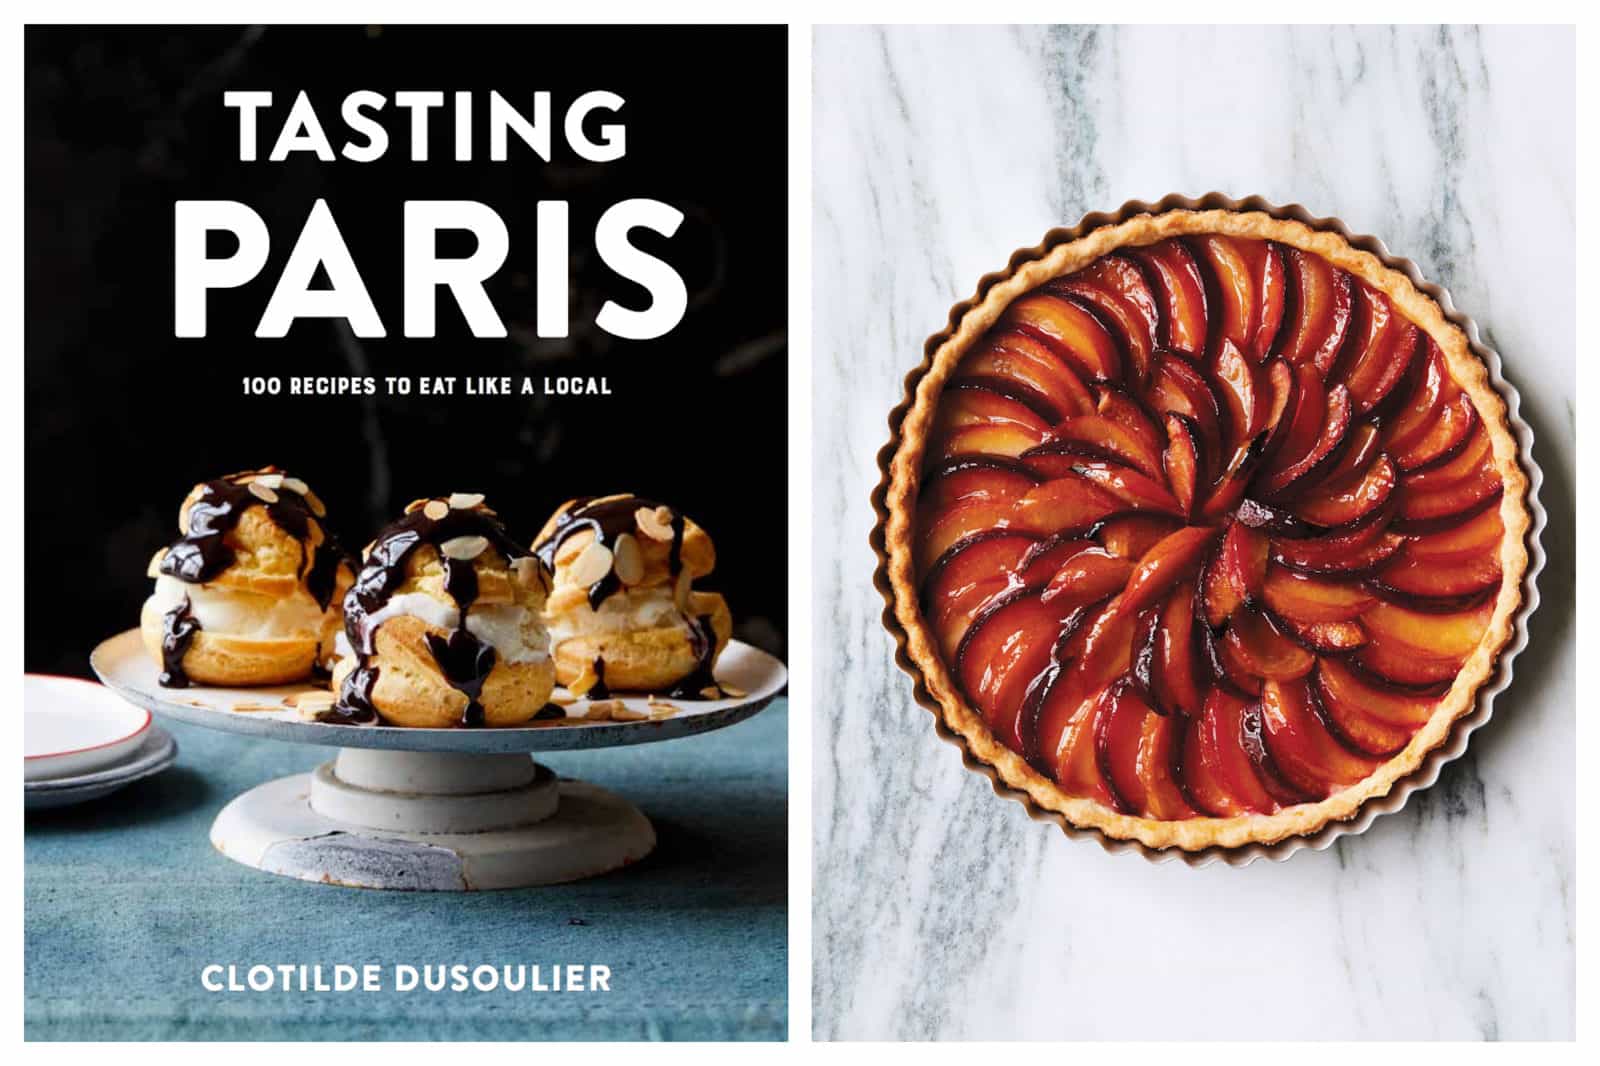 100 French food recipes by Clotilde Dusoulier in her cookbook 'Tasting Paris' Book (left). Beautiful whole caramelized plum tart from the book (left).